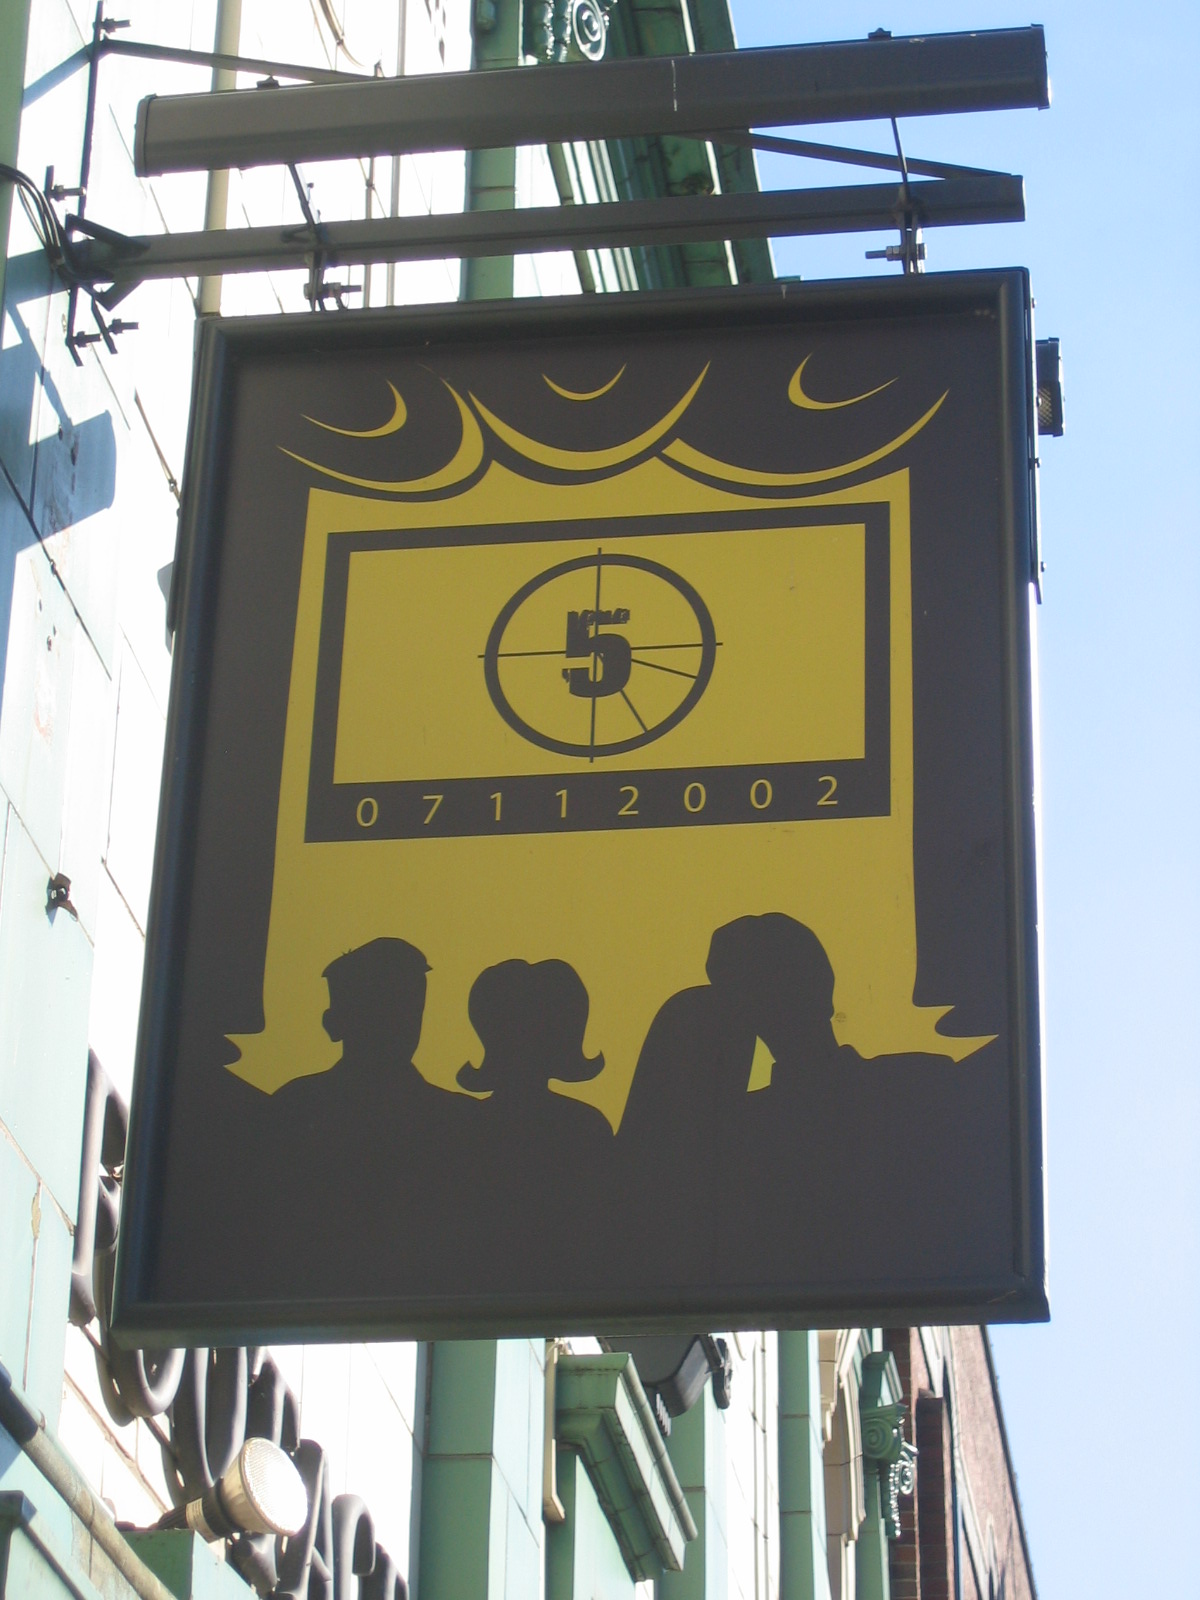 Photo taken by me – The Footage pub sign